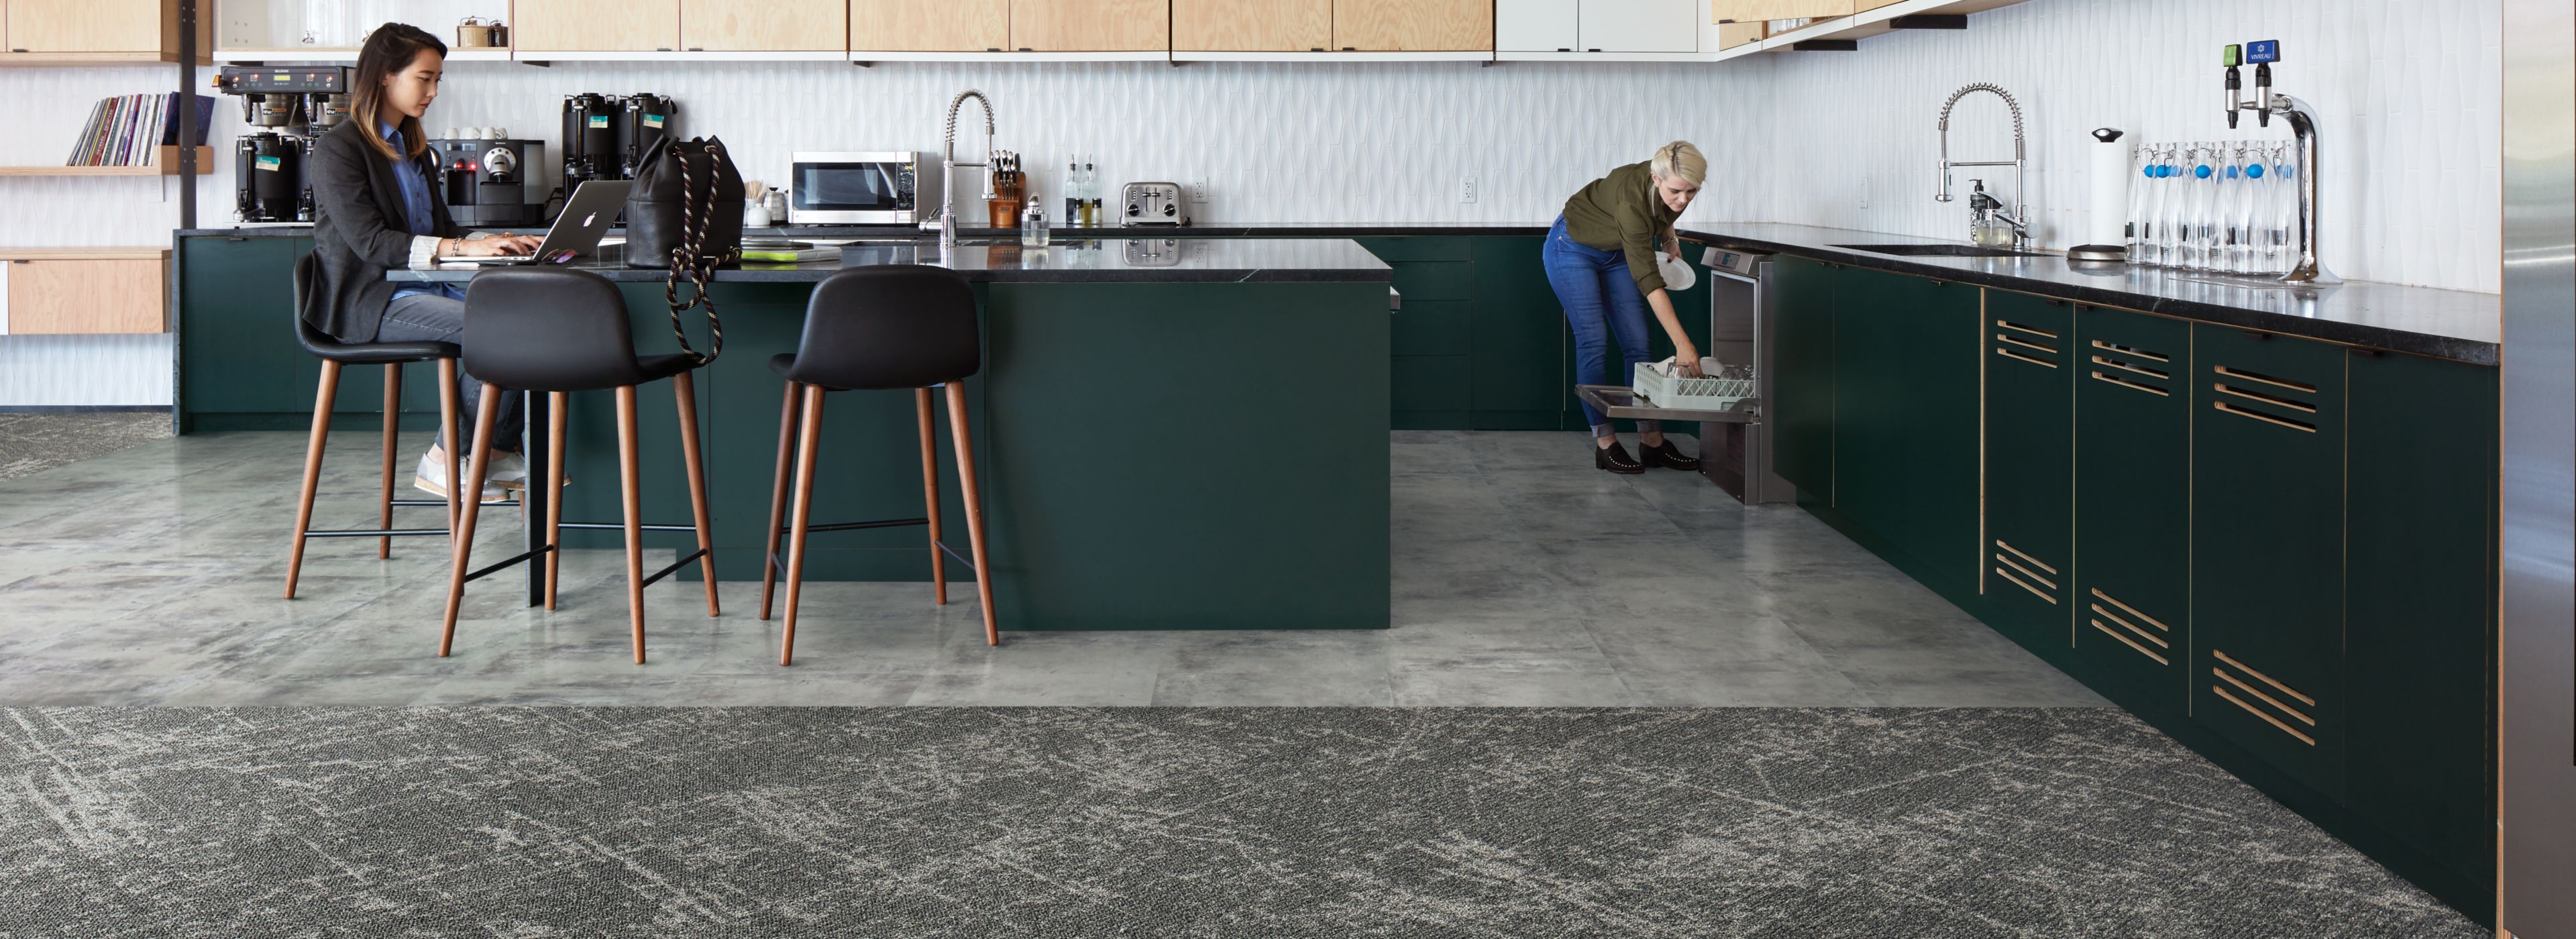 Interface Ice Breaker carpet tile and Textured Stones LVT in kitchen area with women lodaing dish washer and women working on computer image number 1